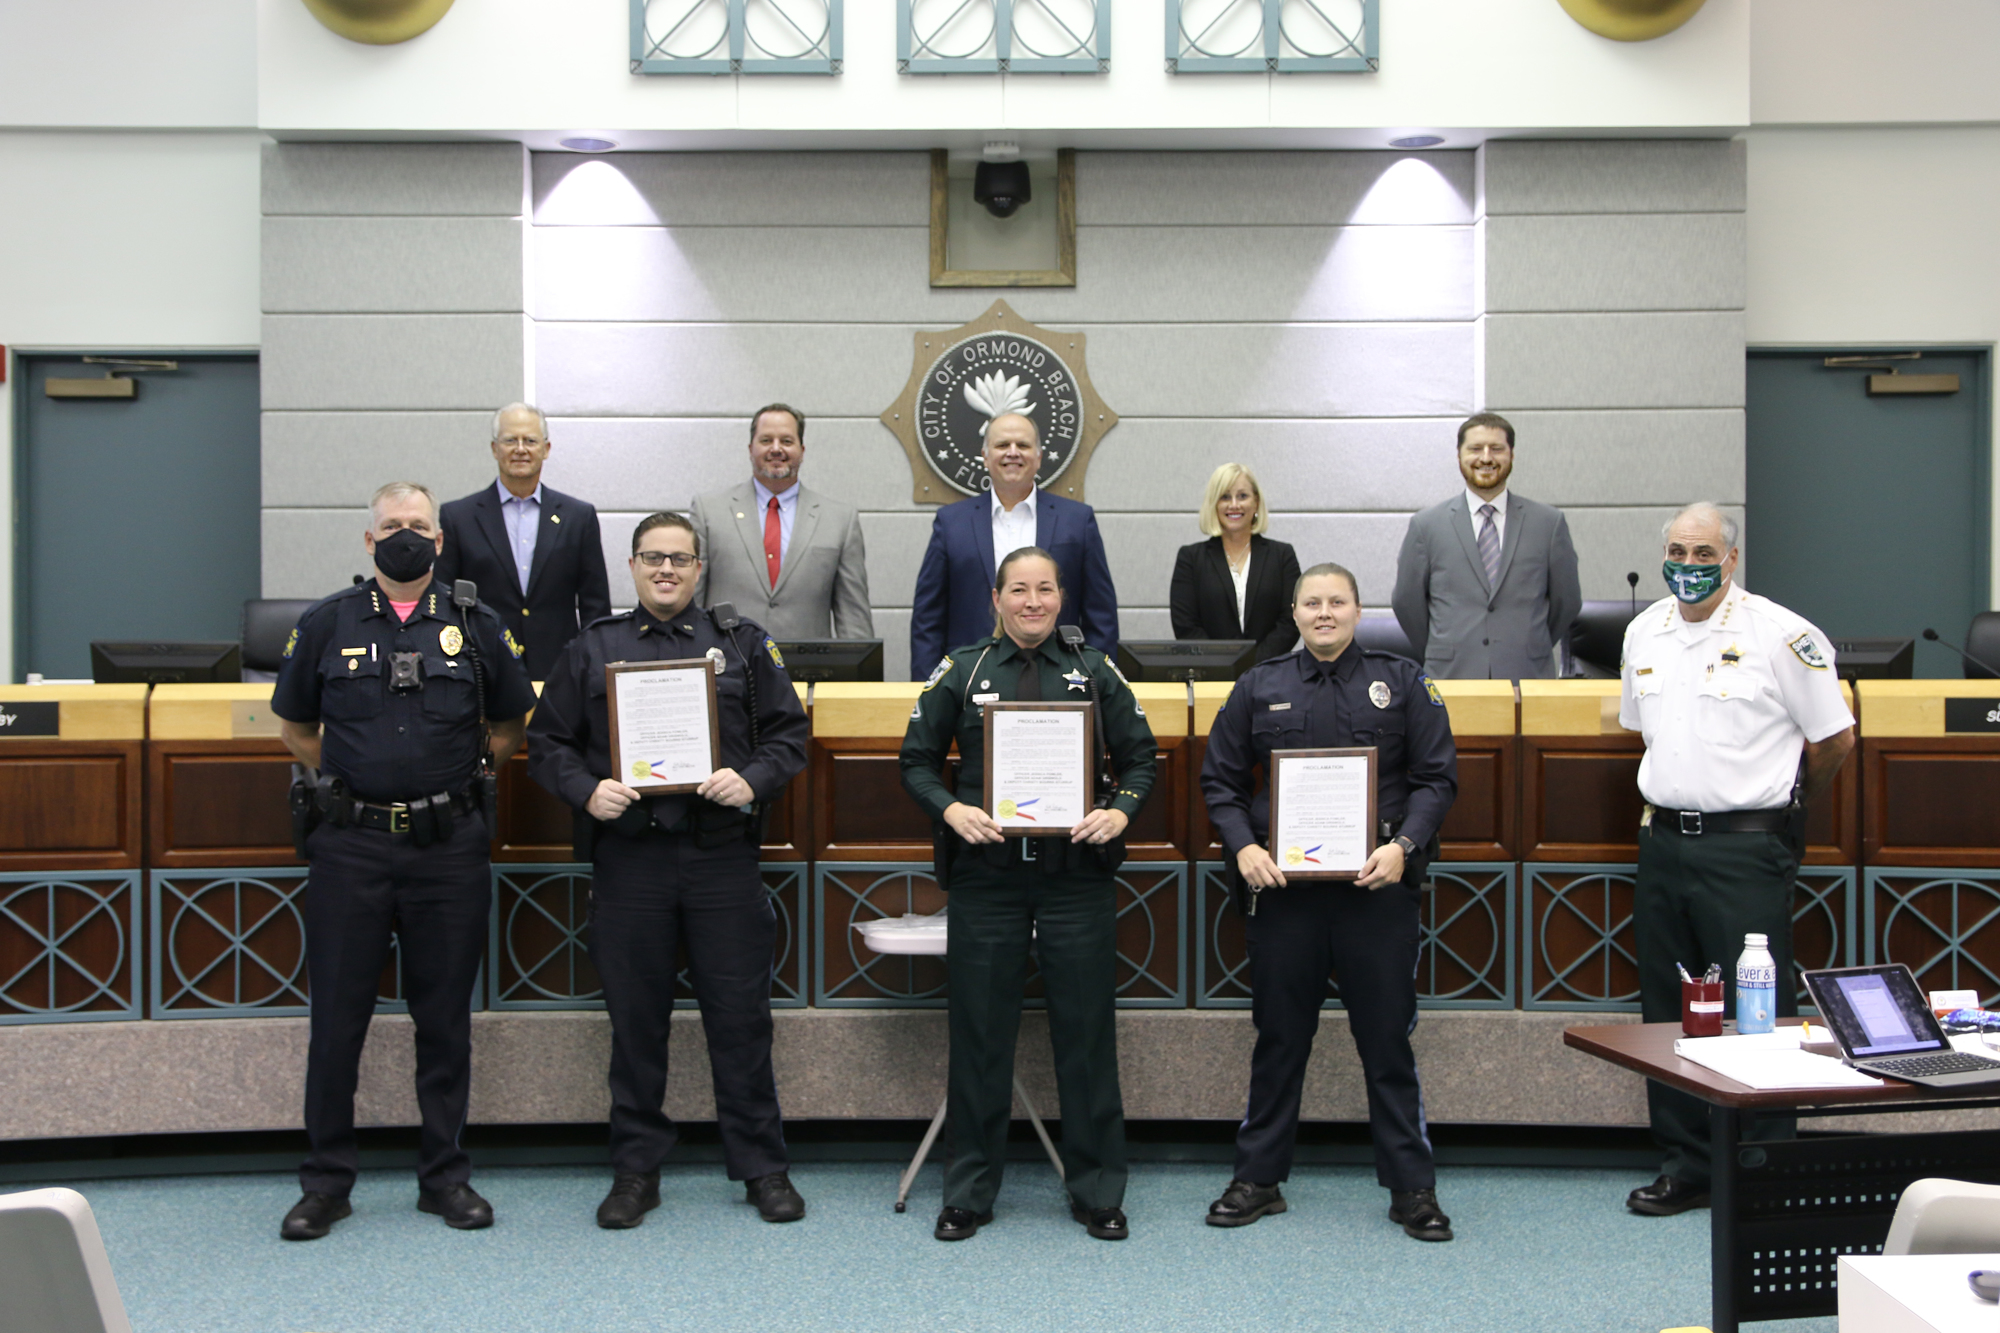 The City Commissioners, OBPD Chief Jesse Godfrey, Officer Jessica Fowler, OBPD Officer Adam Griswold, VCSO Deputy Christy Bourke-Sturrup and Sheriff Mike Chitwood. Courtesy photo